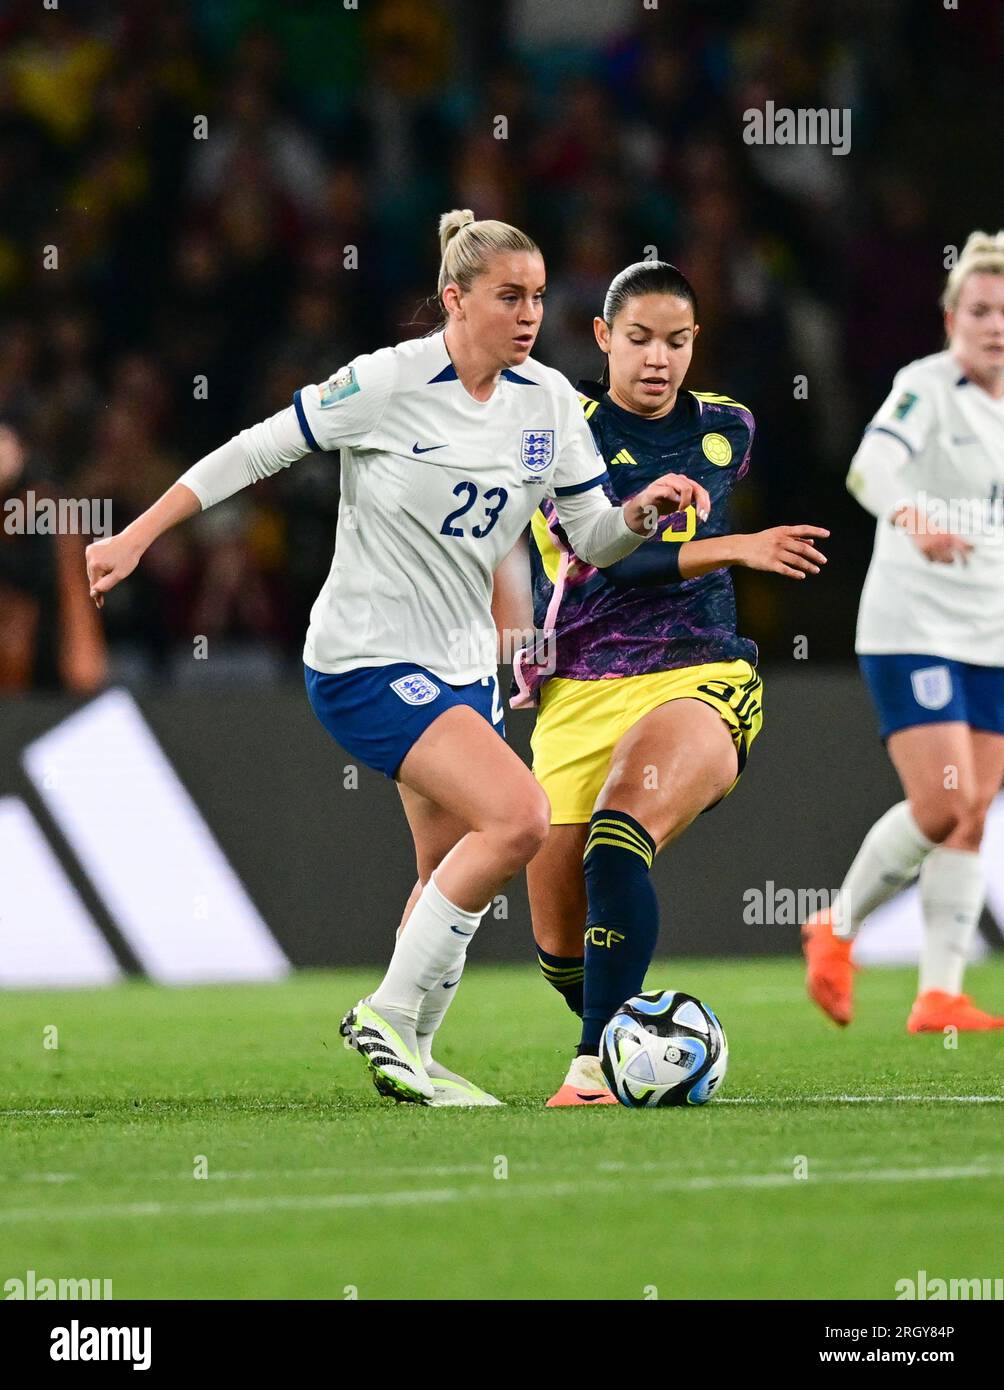 Sydney, Australia. 12th Aug, 2023. Alessia Mia Teresa Russo (L) of England women national soccer team and Lorena Bedoya Durango (R) of Colombia women national soccer team are seen in action during the FIFA Women's World Cup 2023 match between England and Colombia held at the Stadium Australia. Finals score England 2:1 Colombia Credit: SOPA Images Limited/Alamy Live News Stock Photo